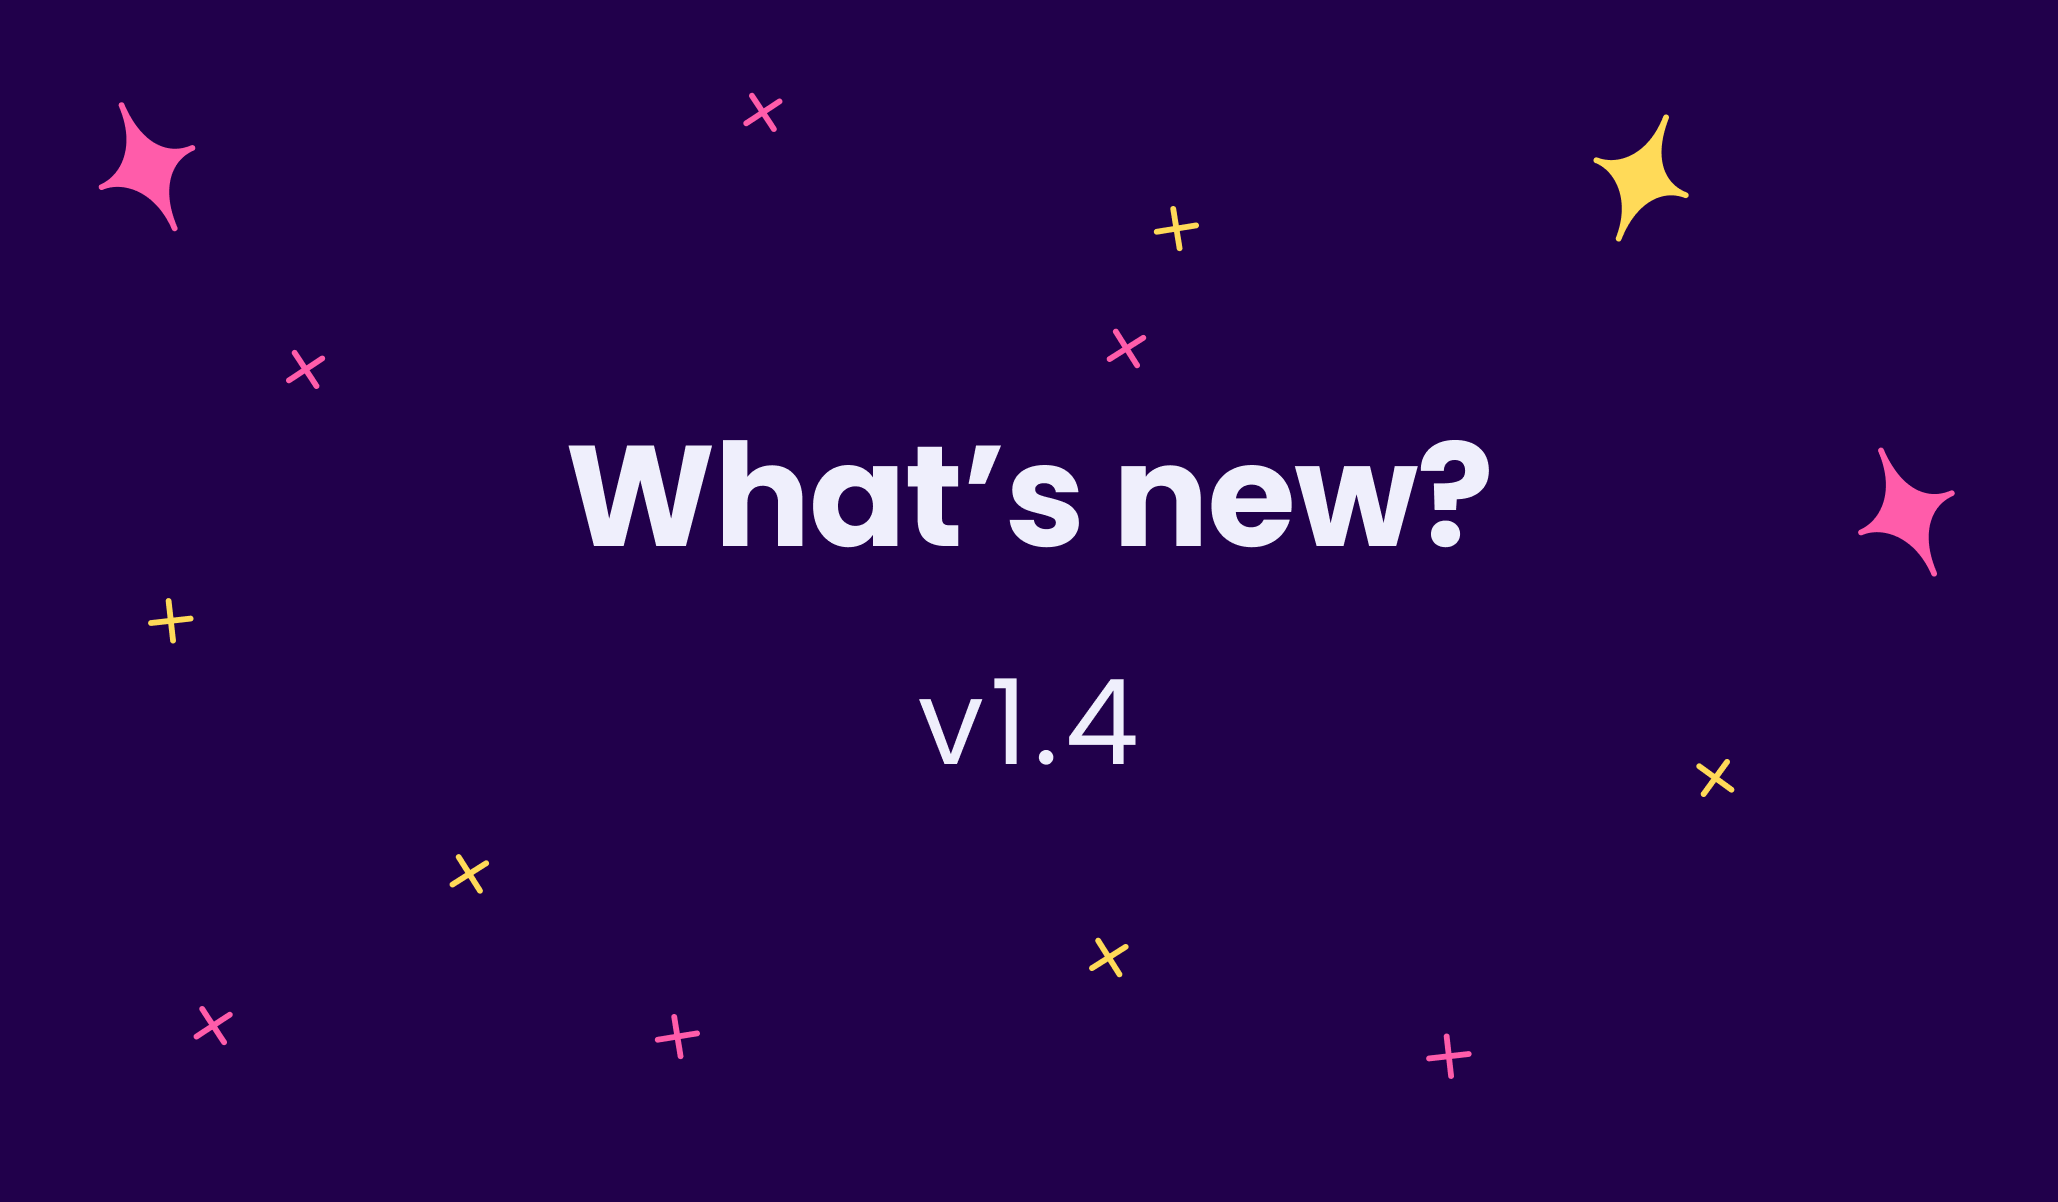 What's new in v1.4?